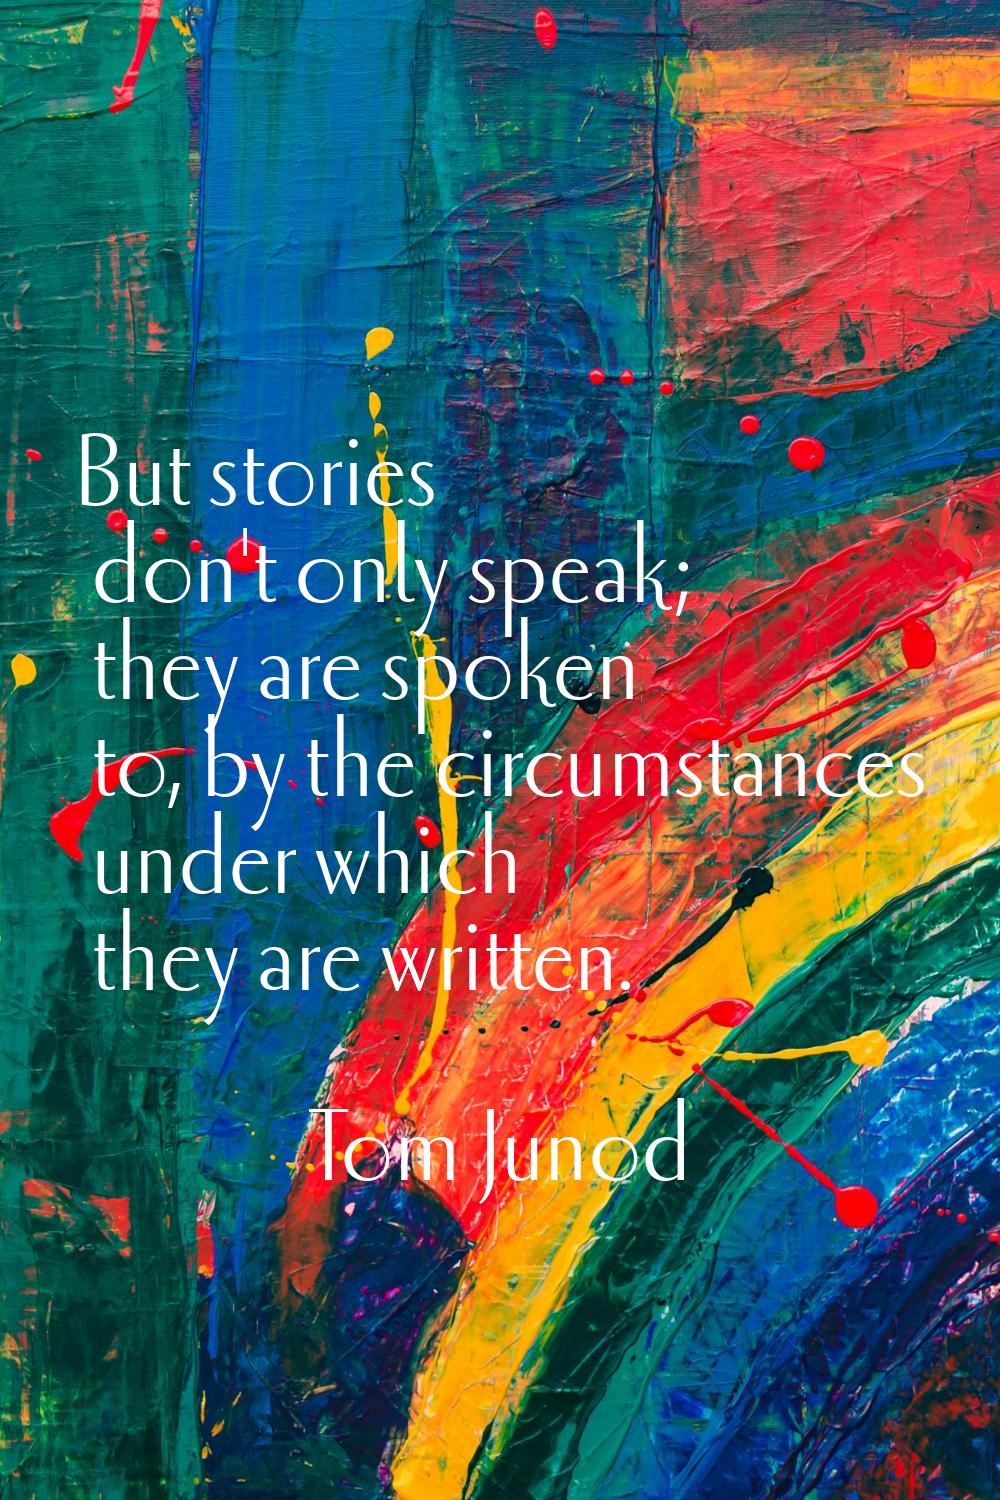 But stories don't only speak; they are spoken to, by the circumstances under which they are written